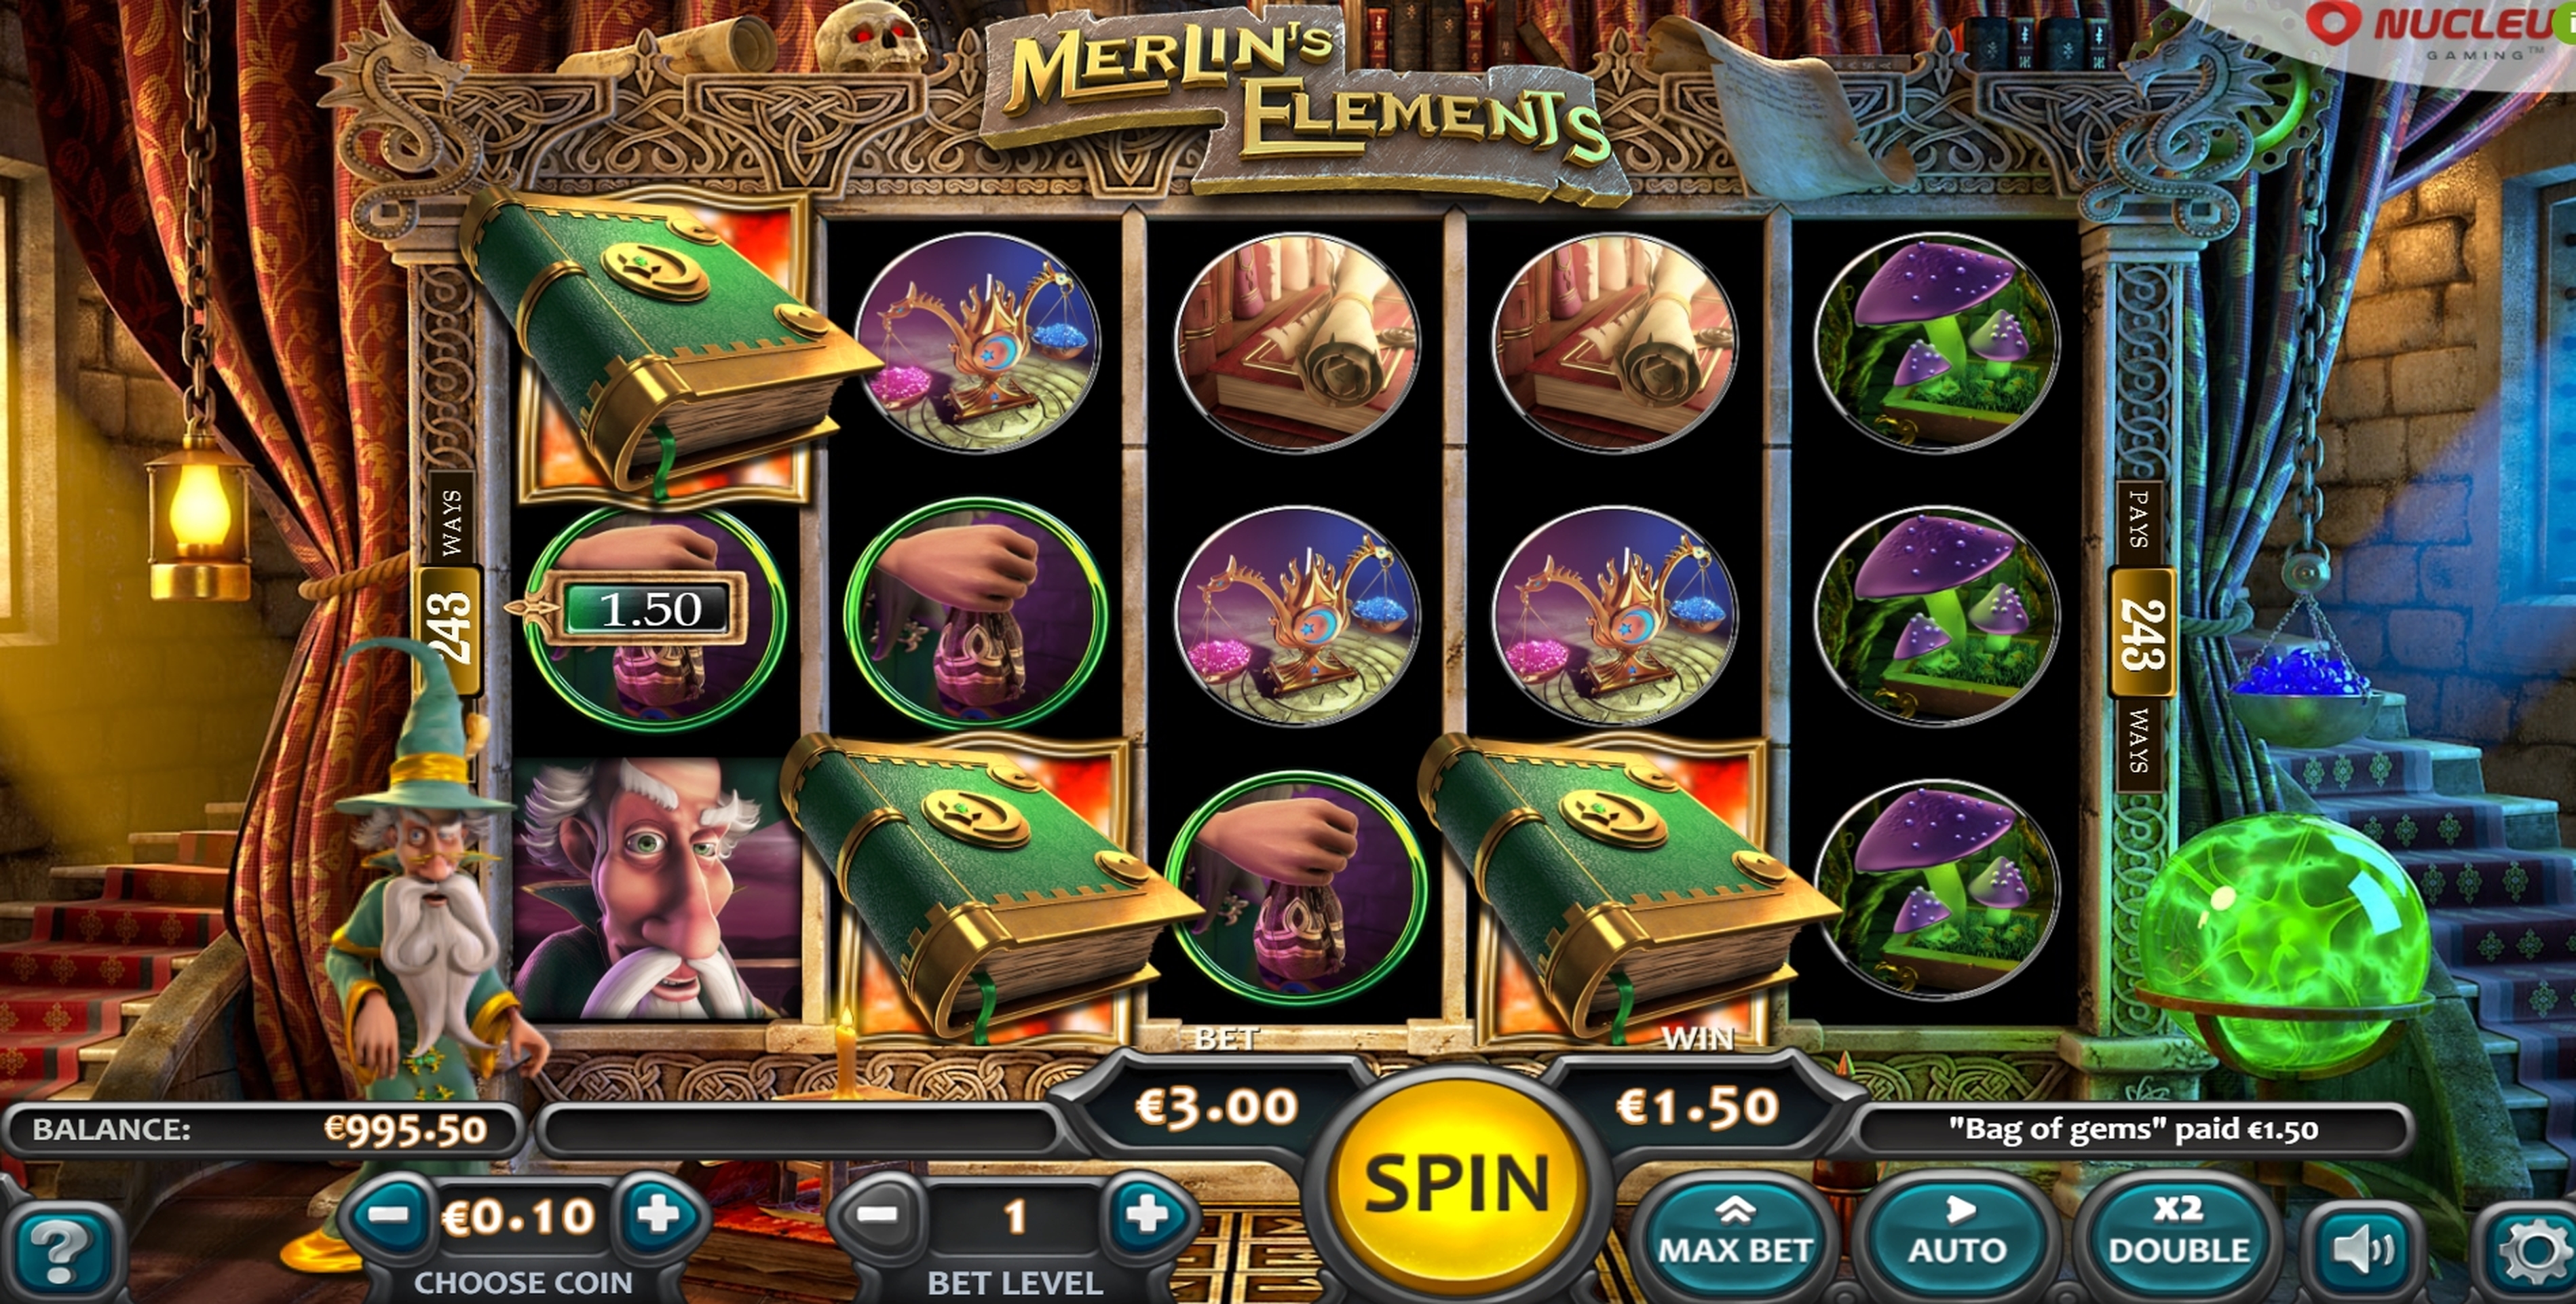 Win Money in Merlin's Elements Free Slot Game by Nucleus Gaming